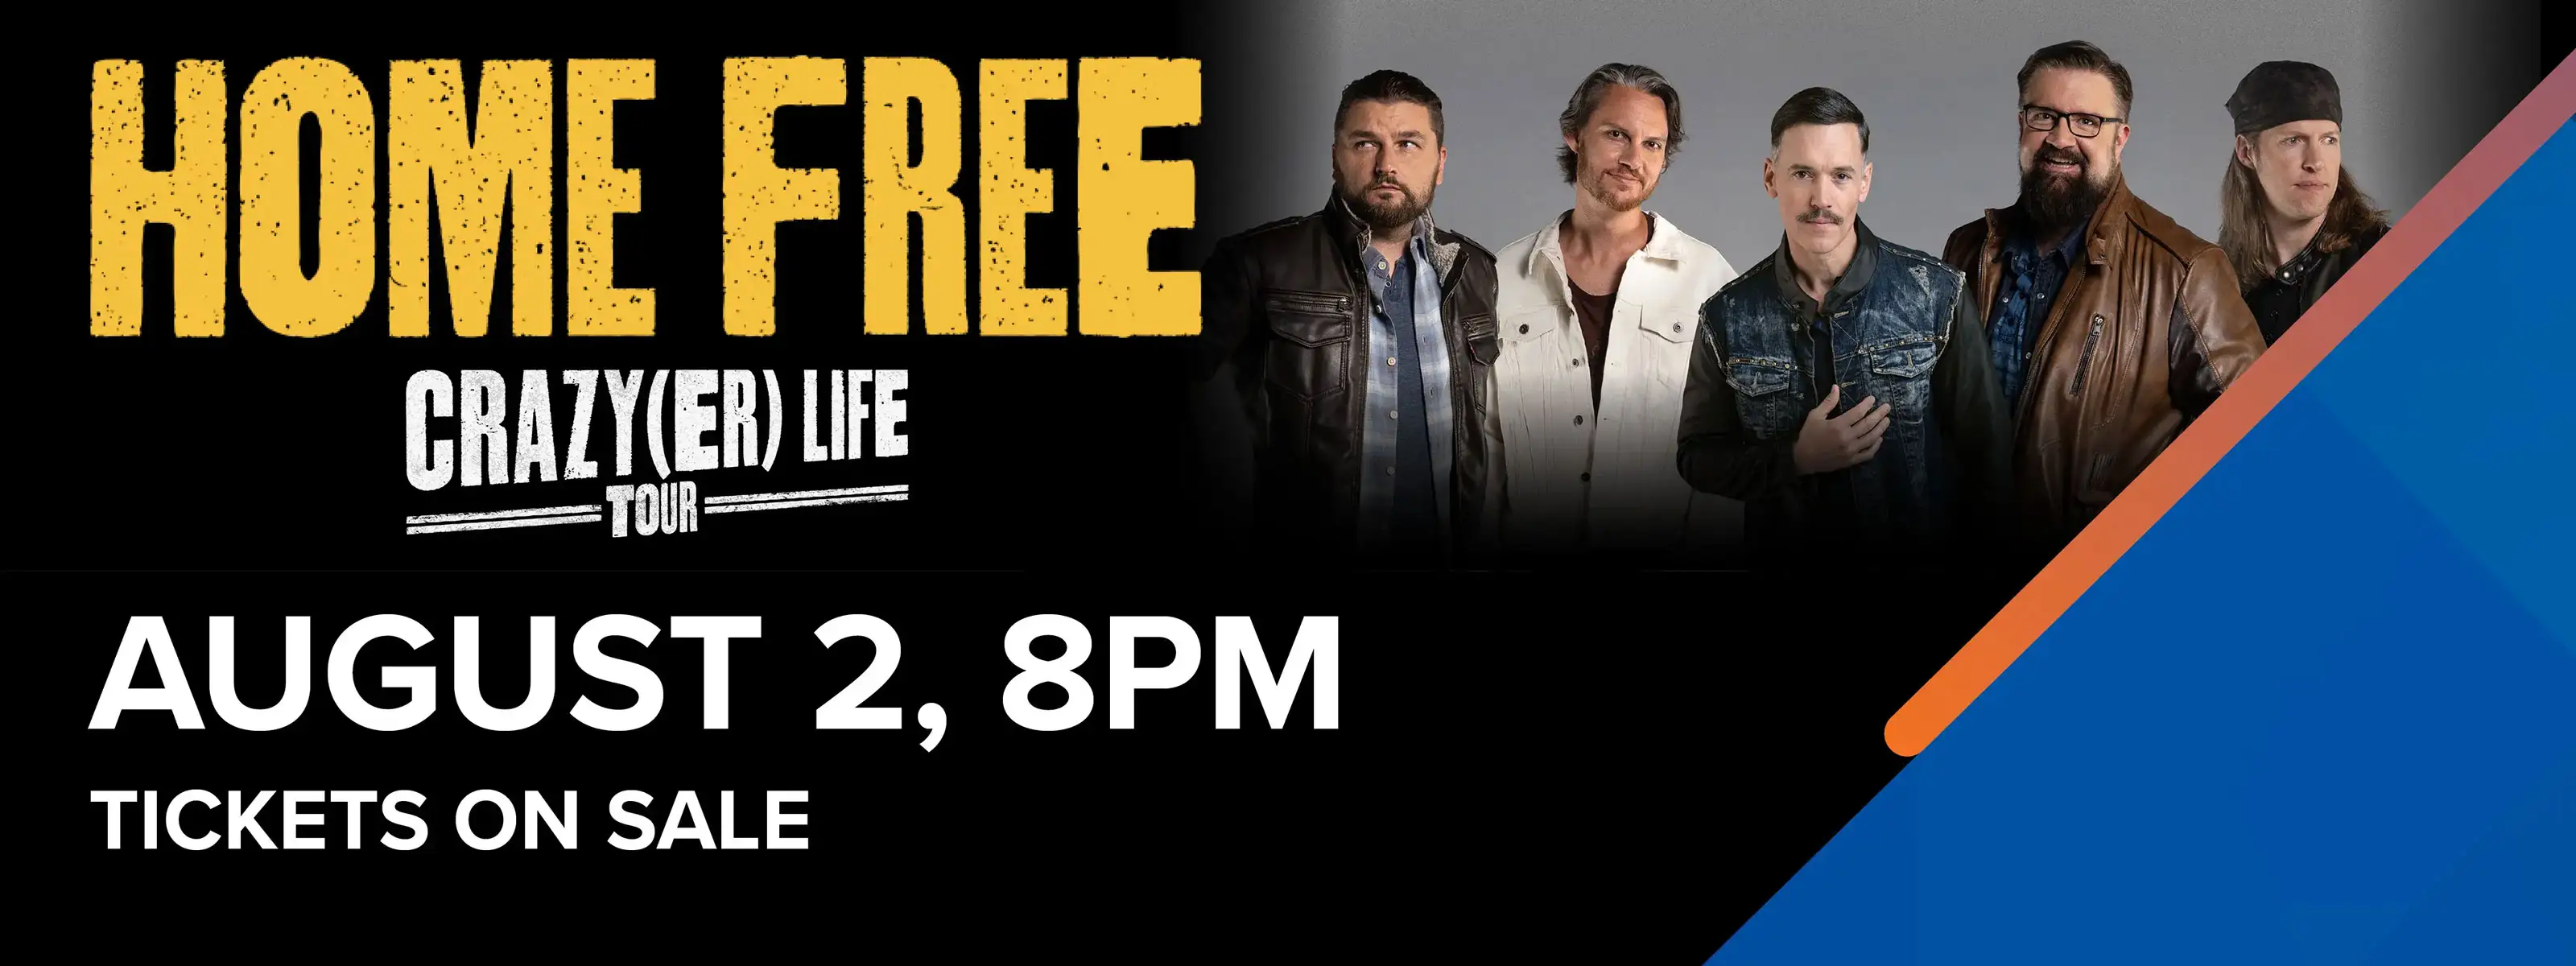 Home Free: Crazy(er) Life Tour - August 2, 8pm Tickets On Sale Now